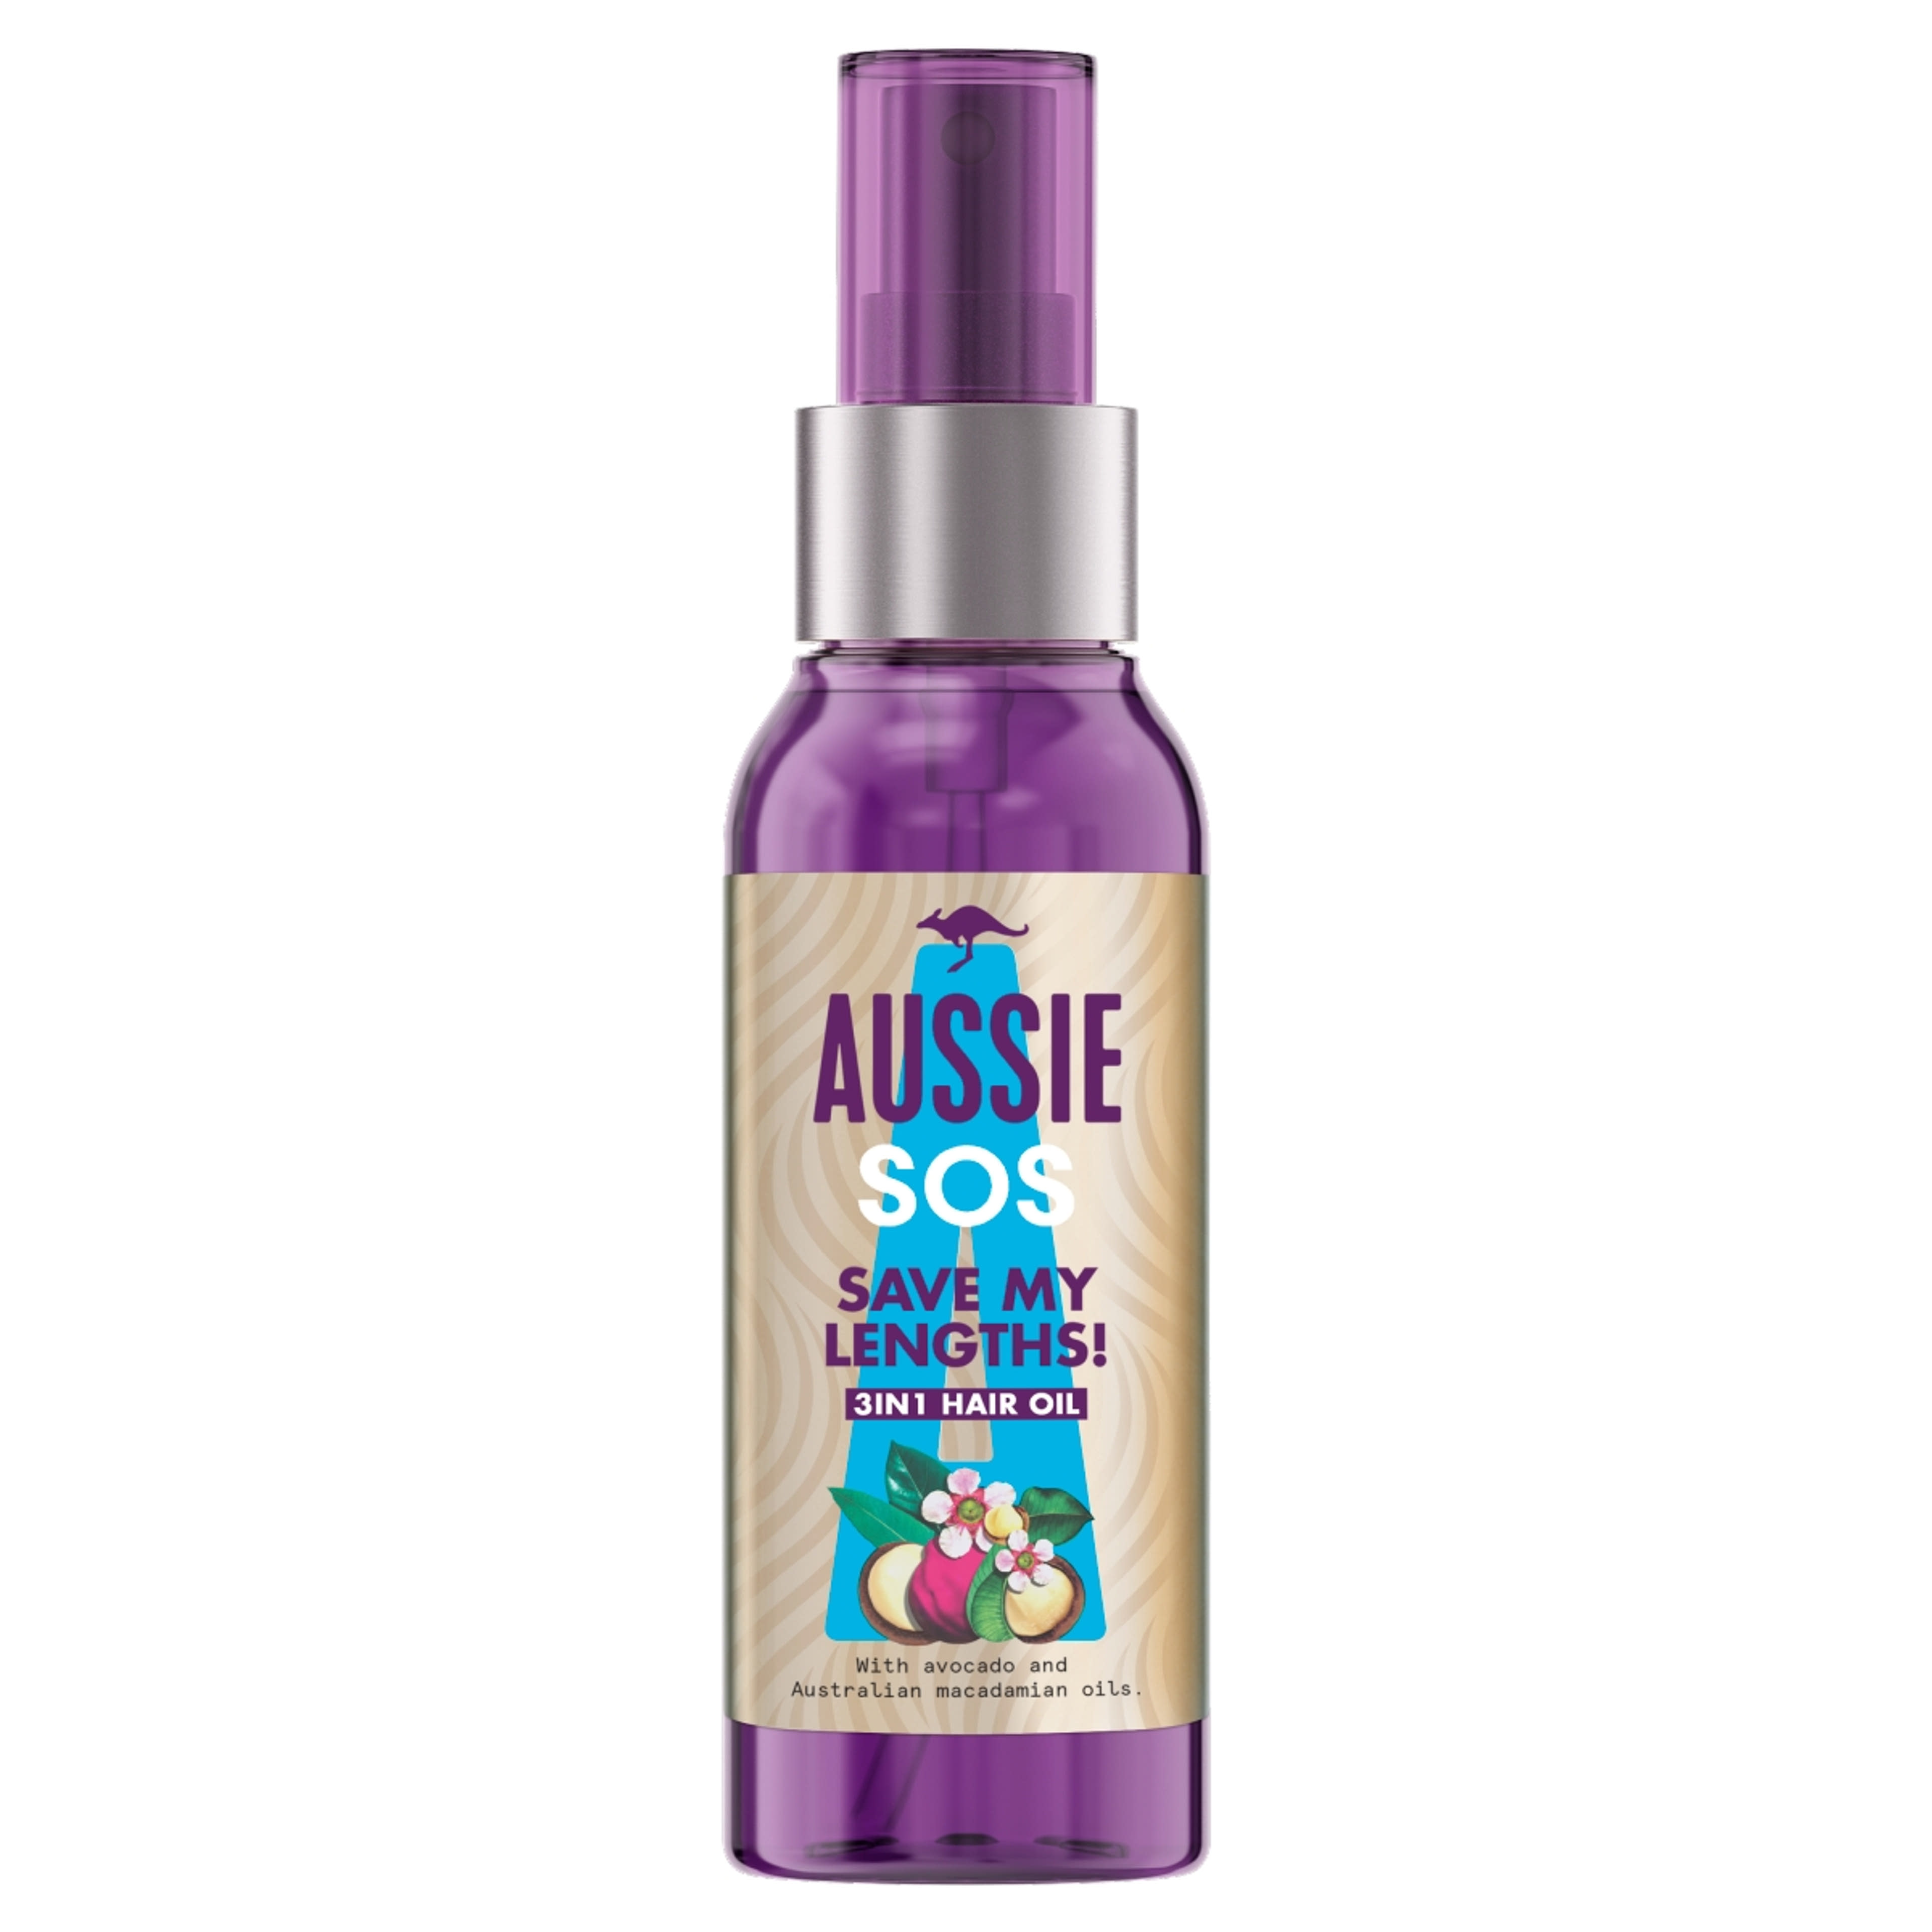 Aussie Sos Save My Length 3in1 oil - 100 ml-1